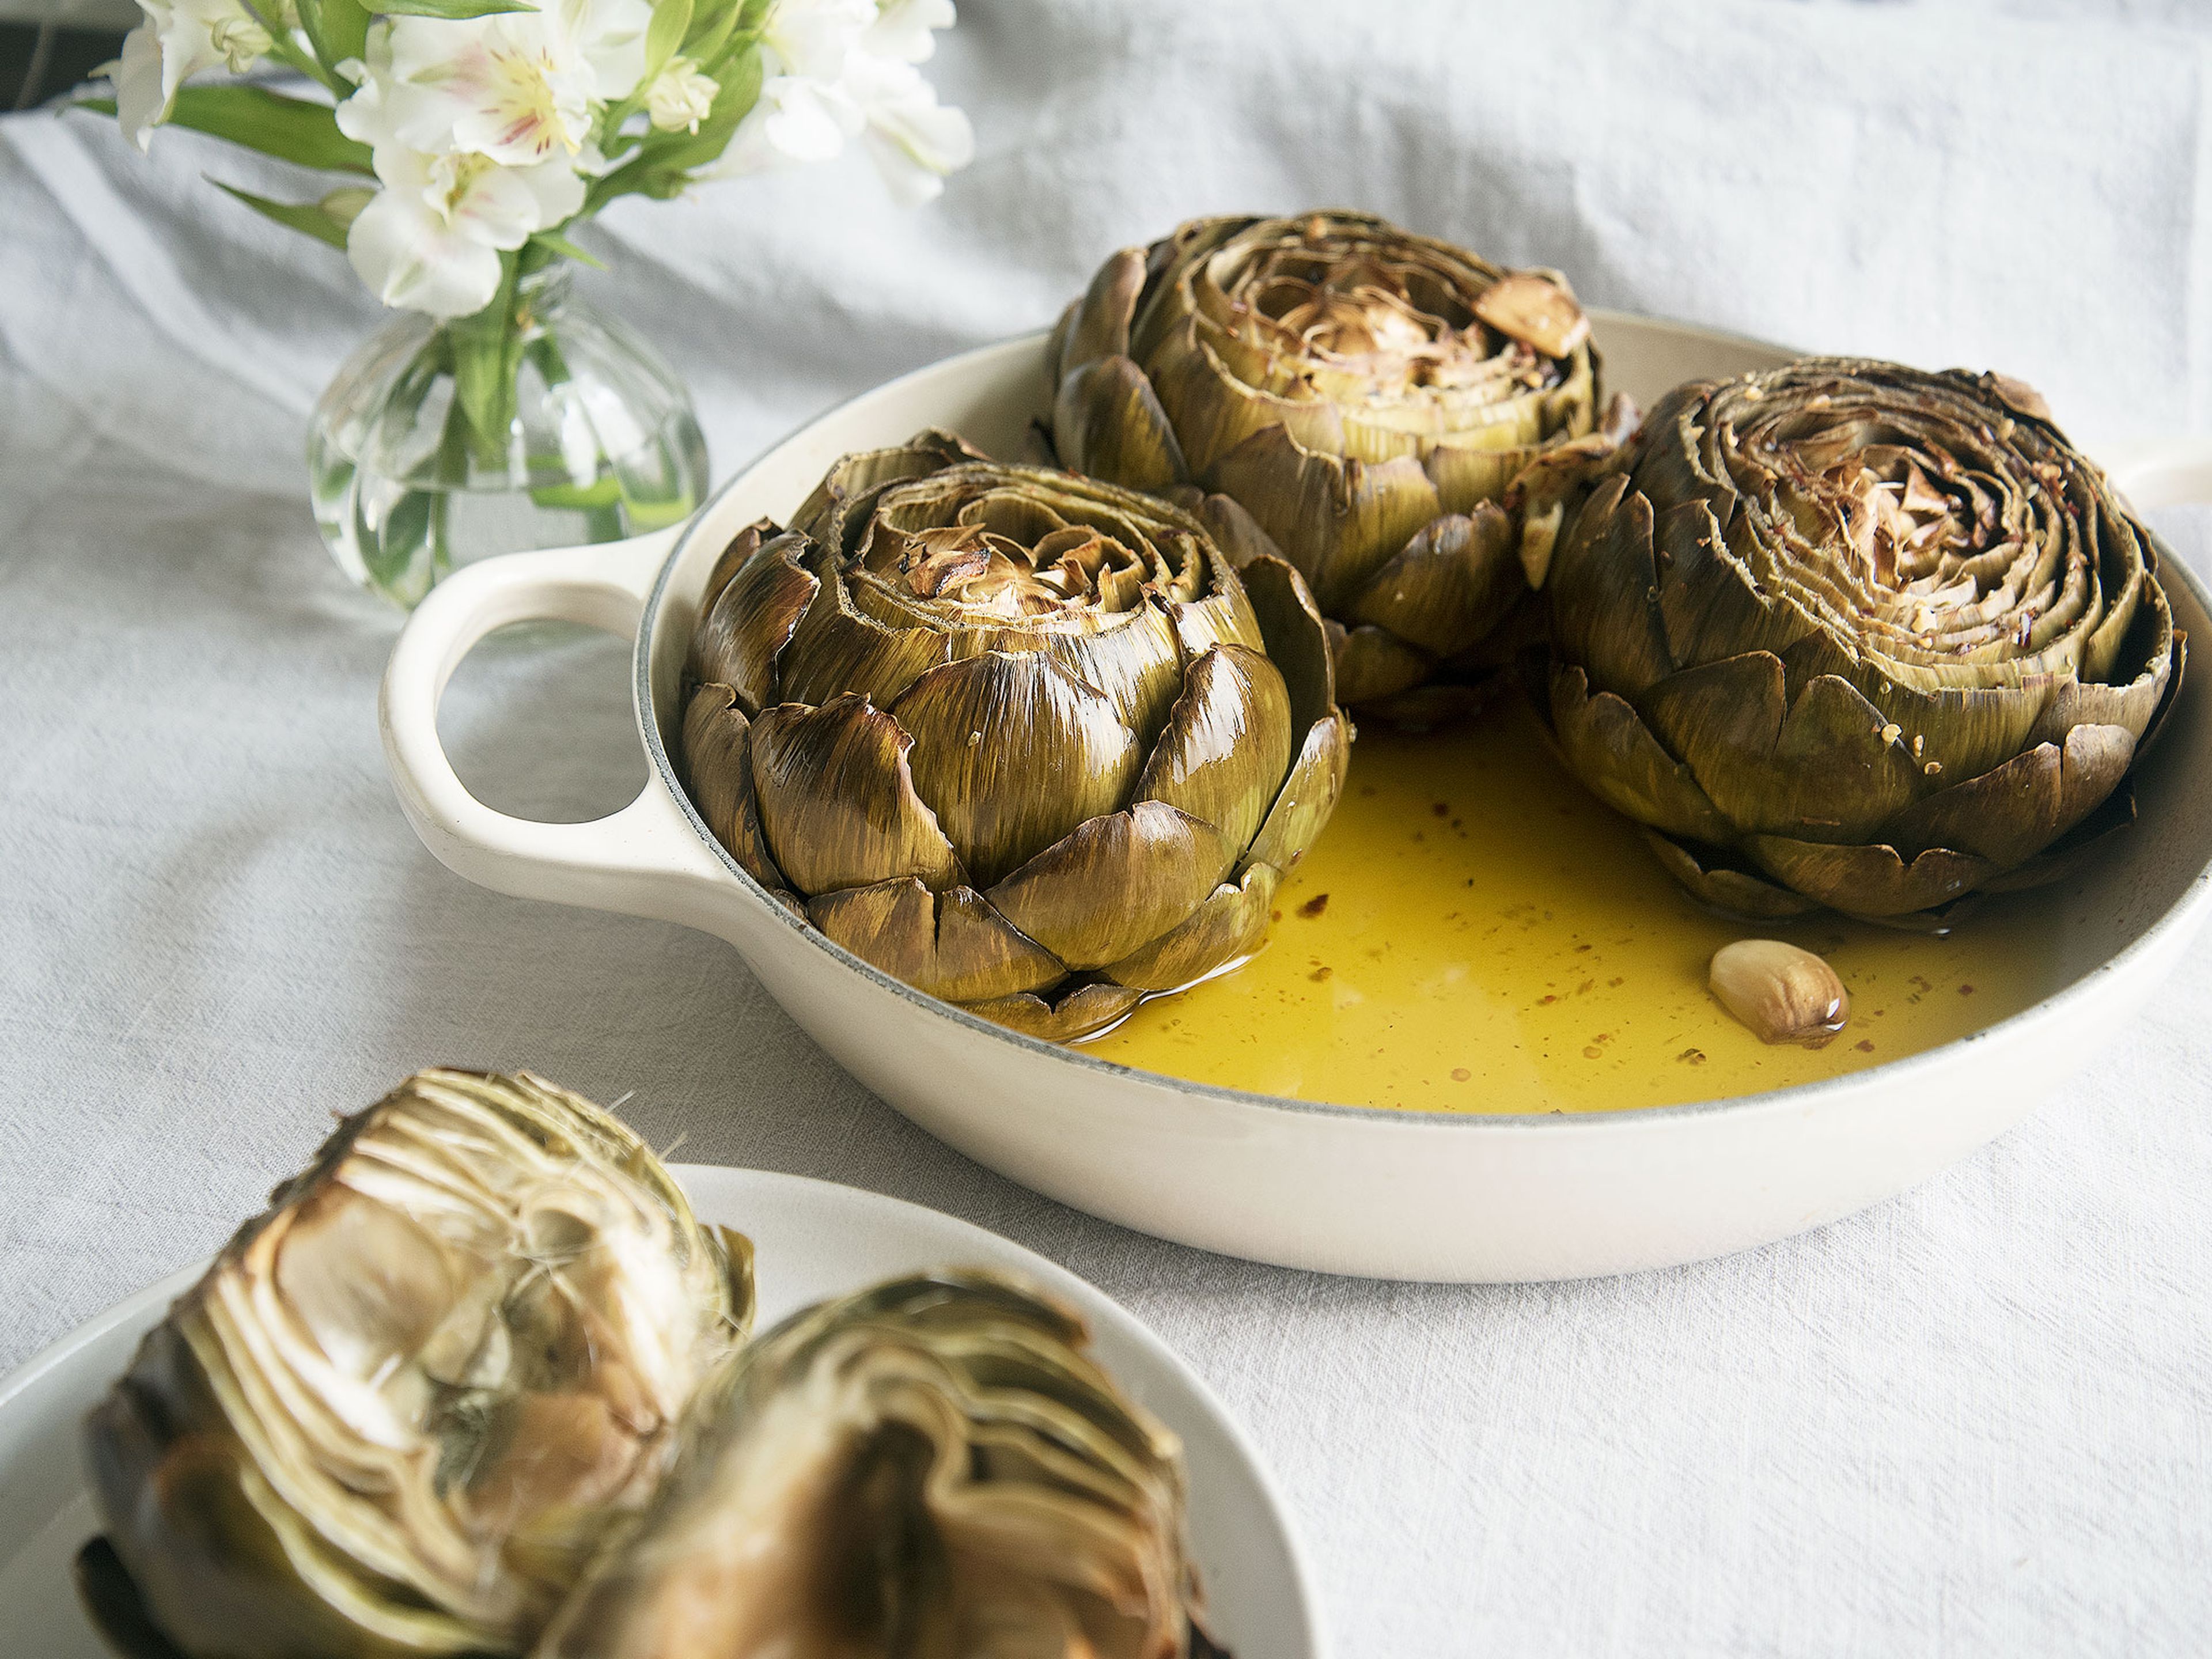 An Easy (and Satisfying!) Way to Cook the Mystifying Artichoke